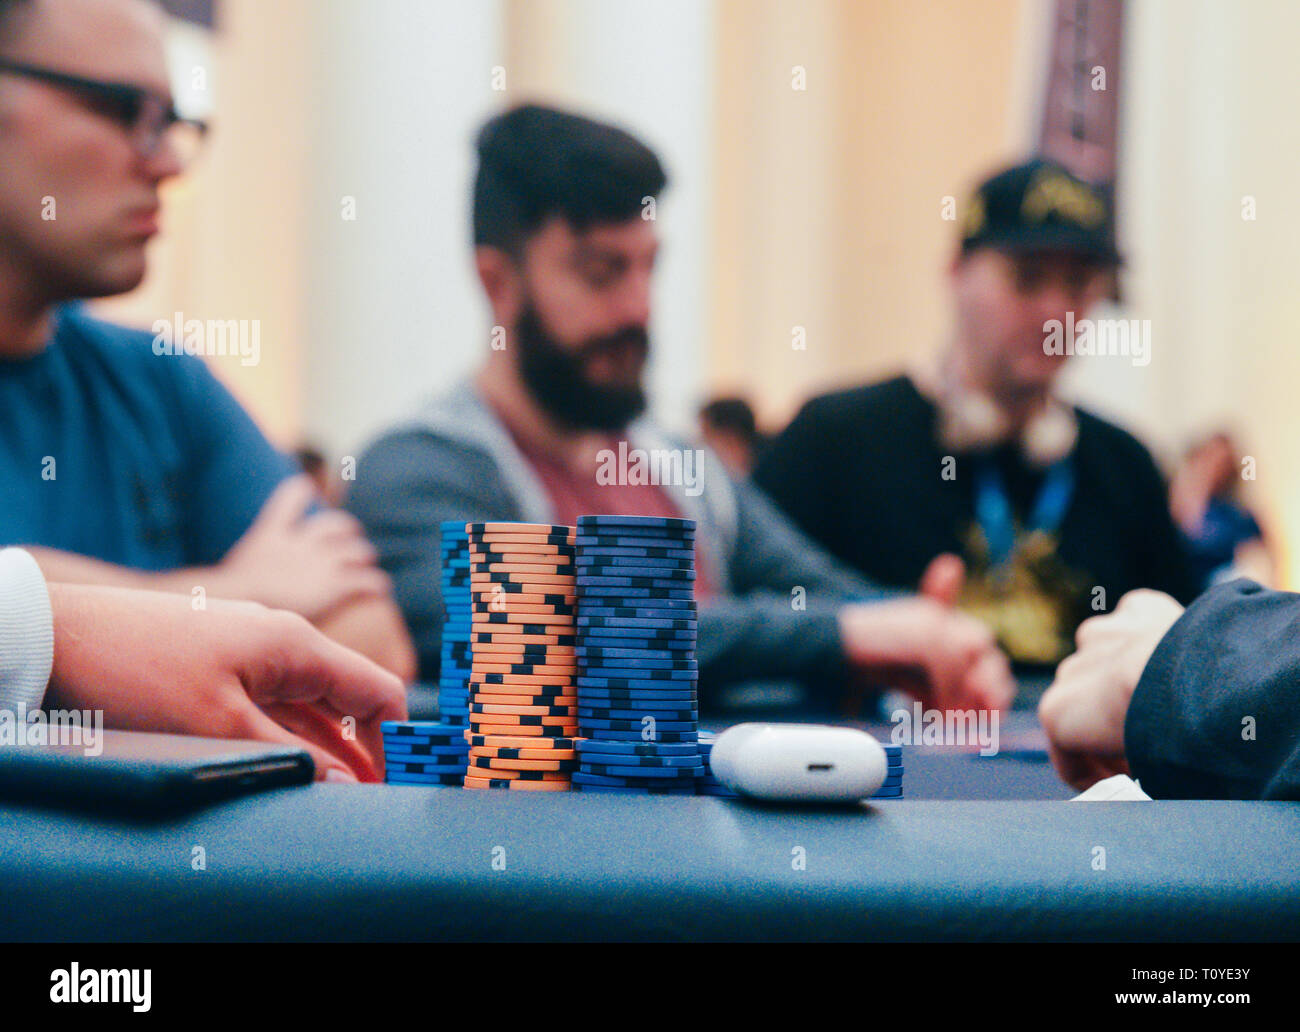 Rio de Janeiro, Brazil - March 21st, 2019: 15-time WSOP bracelet winner and 'Poker Brat', Phil Helmuth at the Main Event of the PartyPoker LIVE MILLIONS South America 2019 occuring at the luxurious Copacabana Palace Belmond Hotel in Rio de Janeiro, Brazil from March 15th through March 24th, 2019. Credit: Alexandre Rotenberg/Alamy Live News Stock Photo